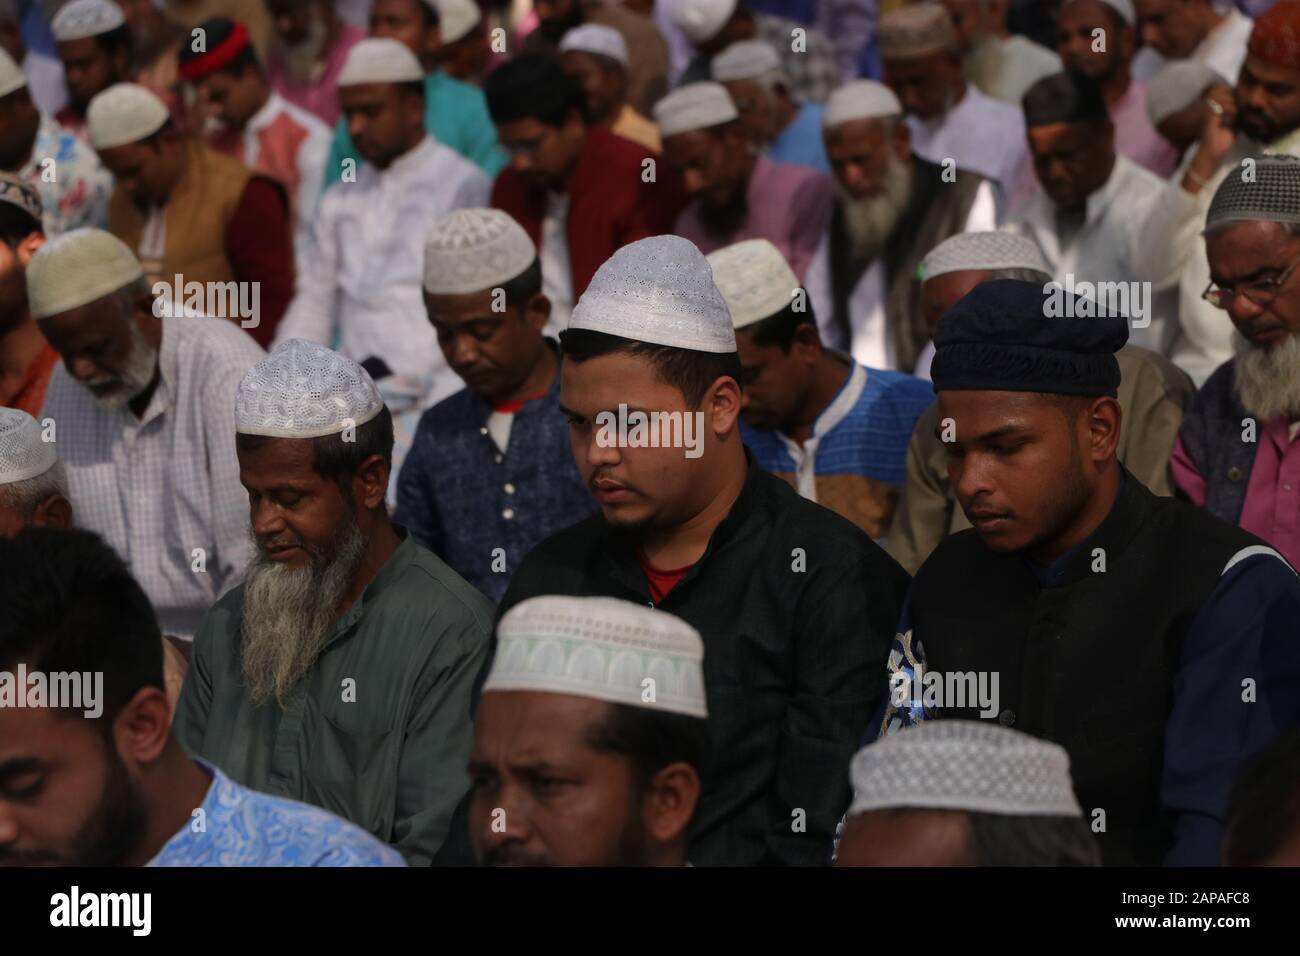 Jan. 12, 2020 - Gazipur, Bangladesh - Muslim devotees gathered in Bishwa Istema at Tongi, Gazipur for the last day of second phase of the event which Stock Photo